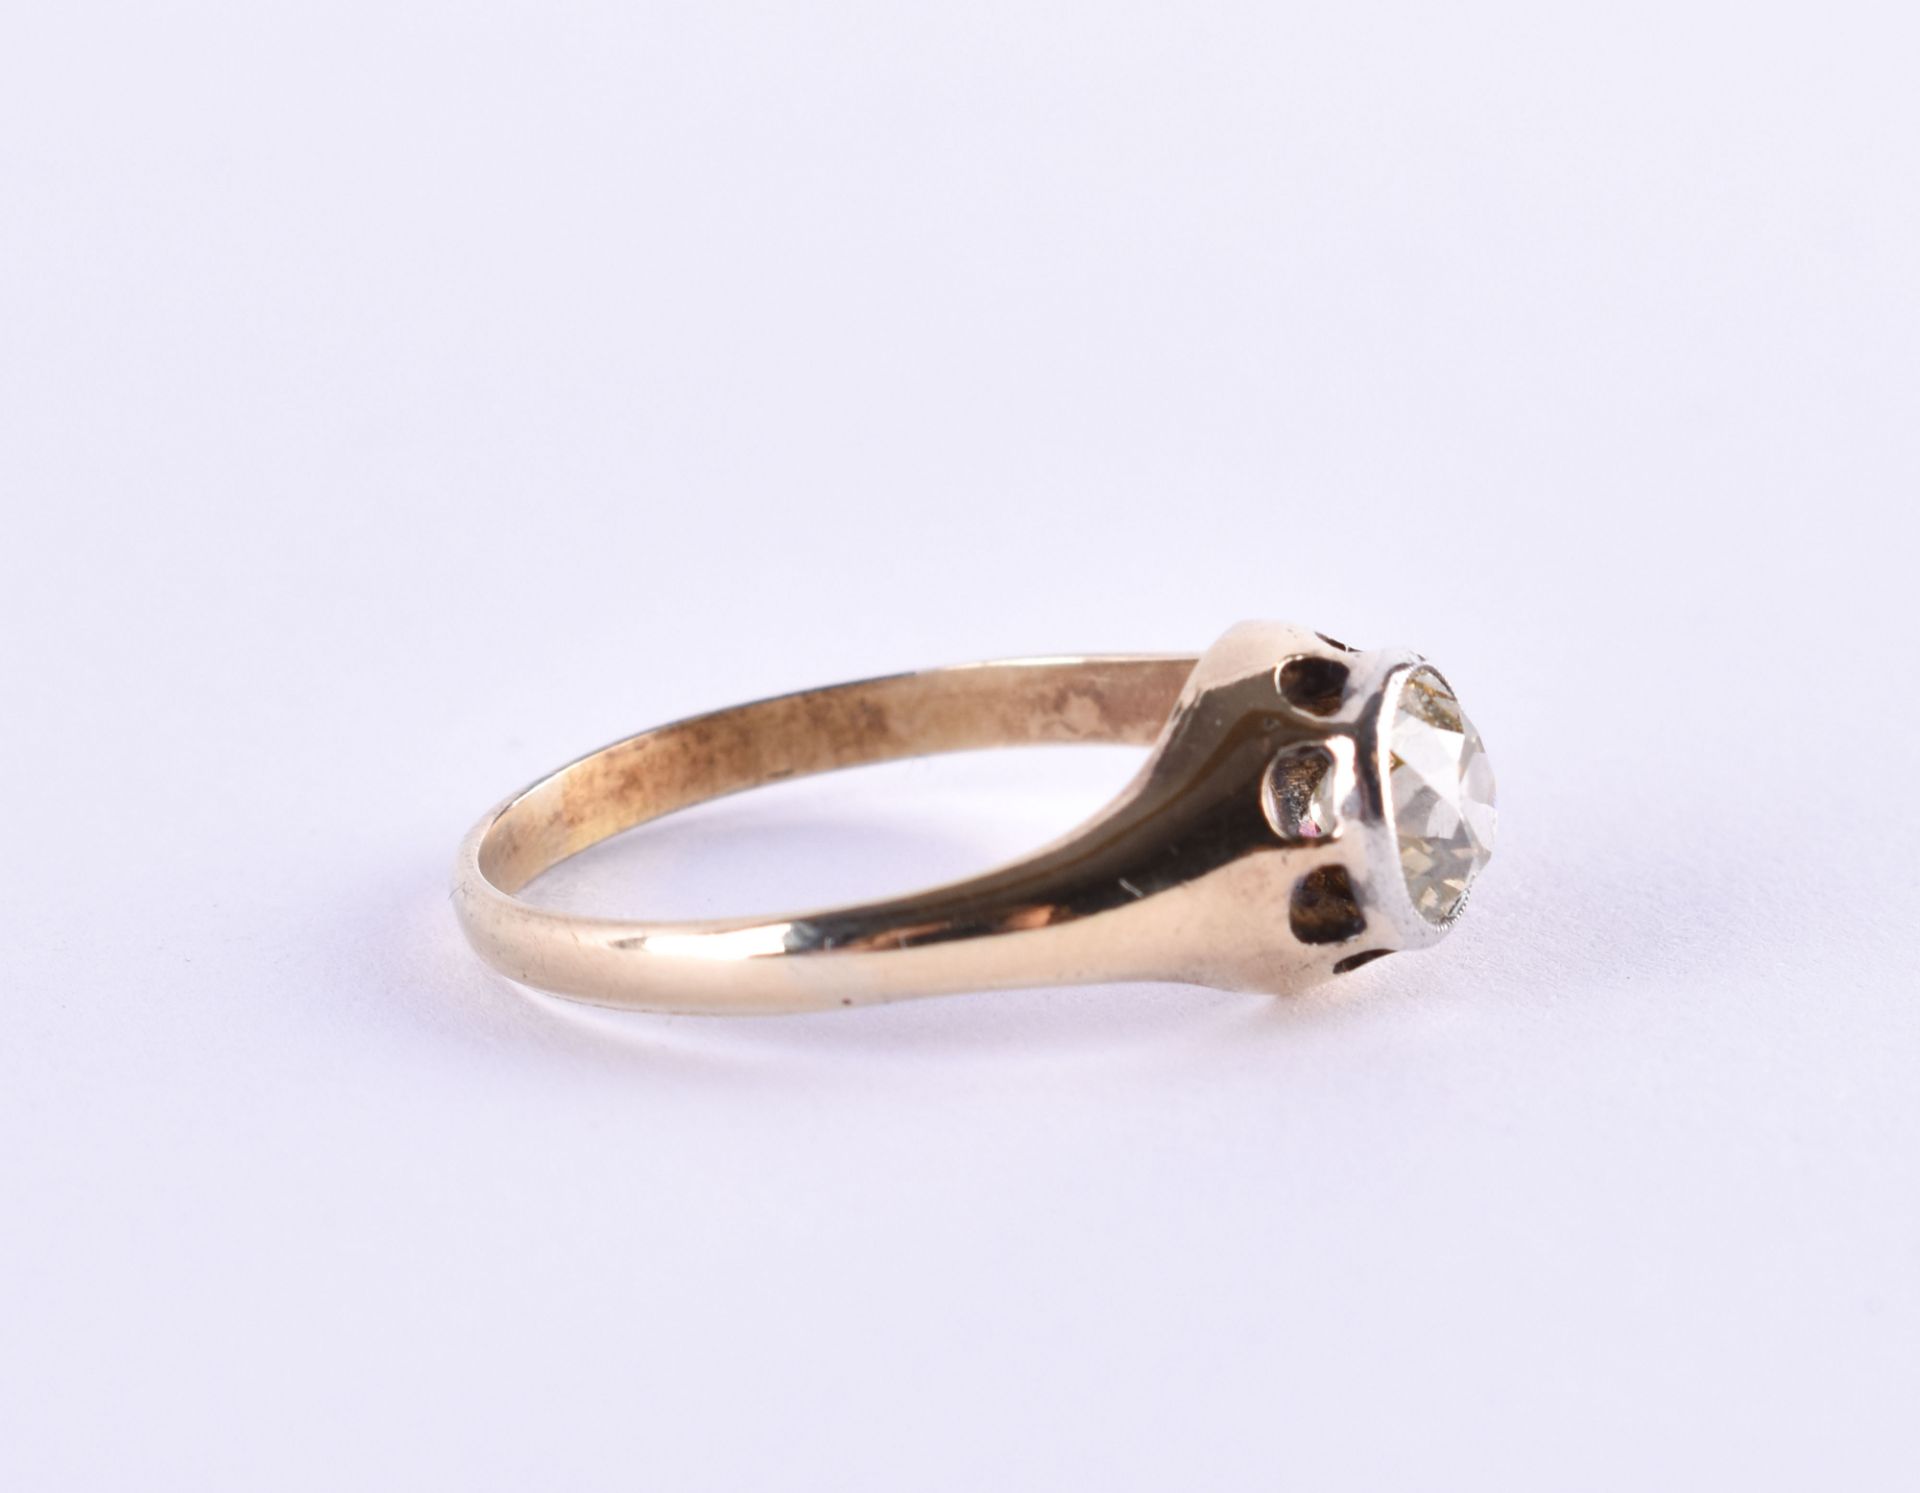 Solitaire diamond ring - Image 5 of 5